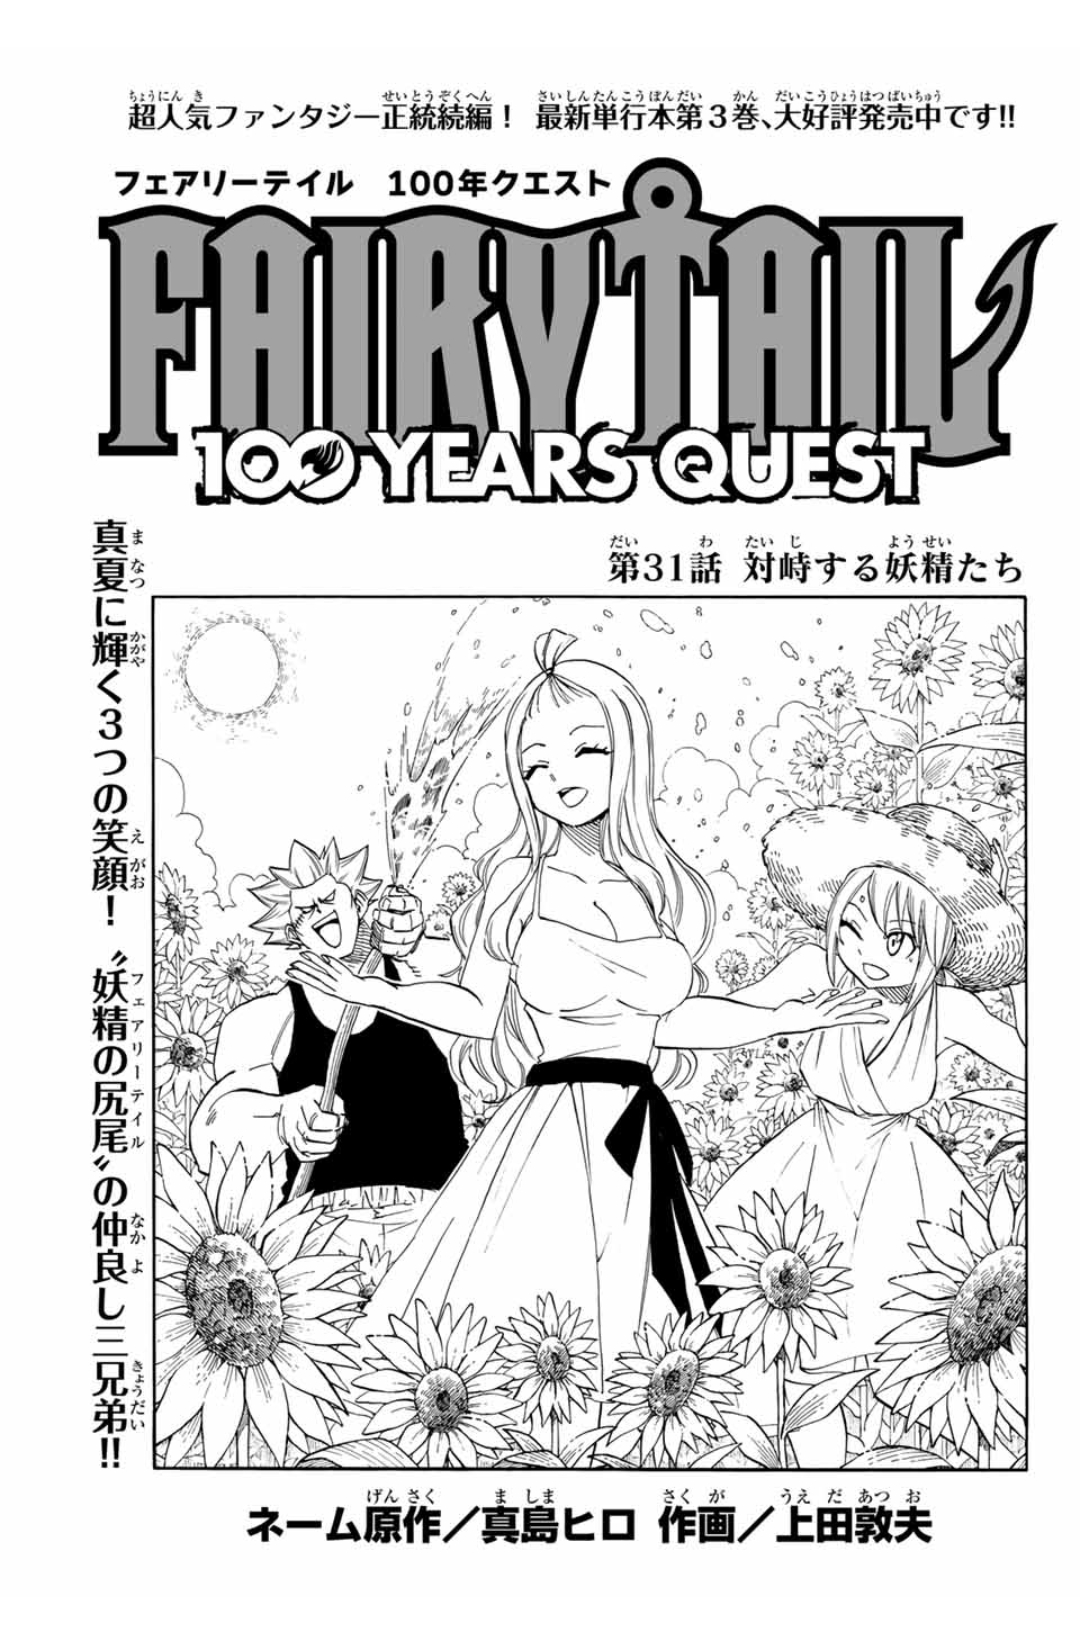 Fairy Tail 100 Years Quest Chapter 31 Fairy Tail Wiki Fandom